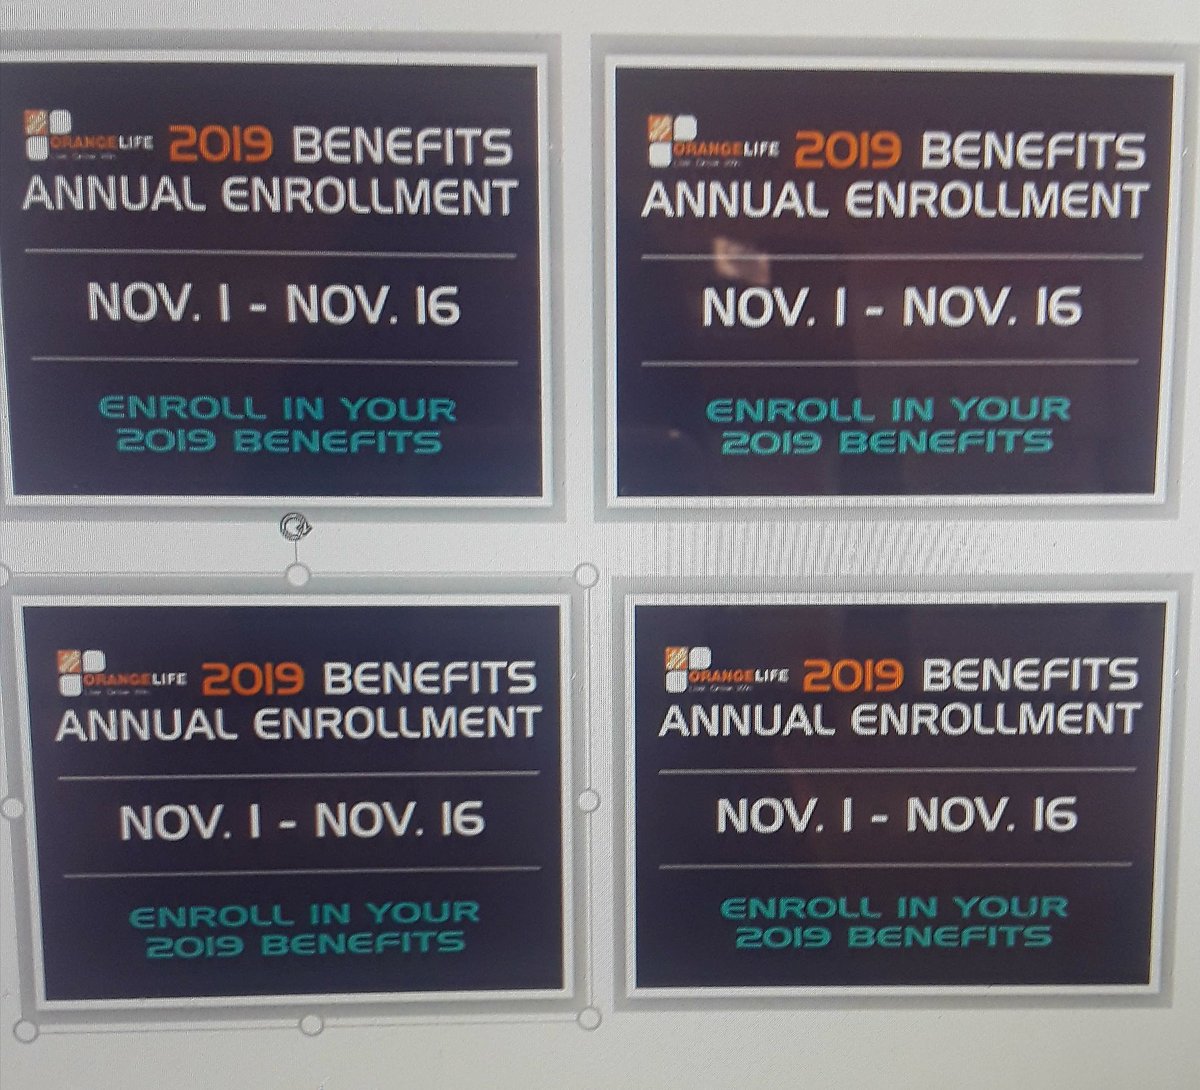 D293 are you ready! Day 2 of the #SayYes Challenge! Help an Associate with their #AnnualEnrollment #JustSayYes #yesvember #NYMSaysYES #SayYesChallenge @eneka6177 @TDonnelly921 @__CeCiMe @aly_ASDS @mtarazona1392 @456Cherrett